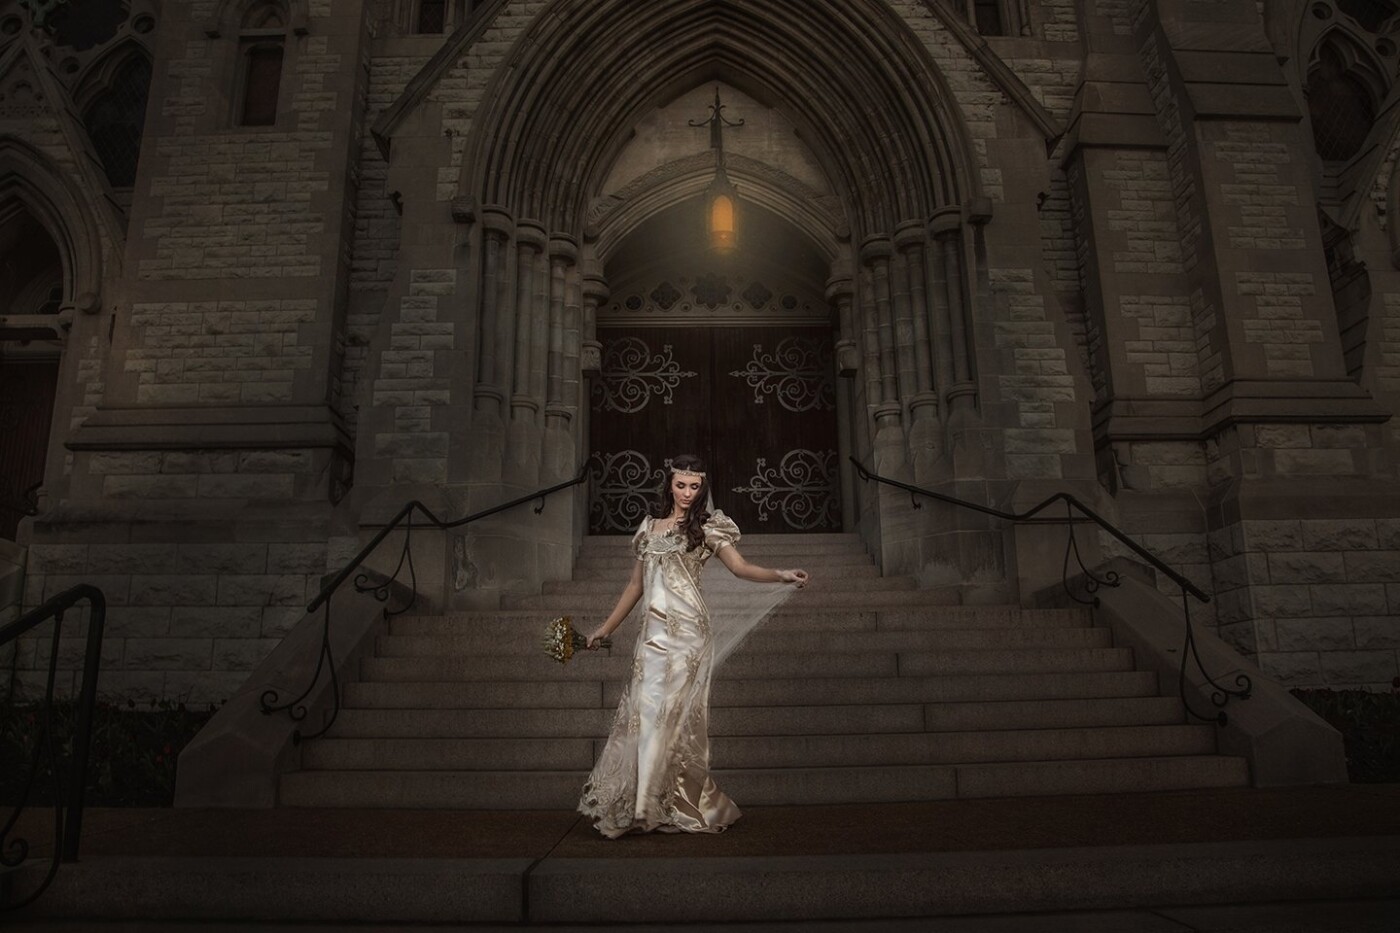 This image was taken in St. Louis, MO at the St. Francis Xavier Church with friend and model Corrin Stellakis of Syracuse NY. I wanted to create an image that displayed the beauty of this dress (made by friend Kate Mitchem, who is also a photographer located in VA),  and this church was the perfect backdrop for it!  Corrin is as beautiful on the inside as she is on the outside and it was a lot of fun creating this special portrait for her. 